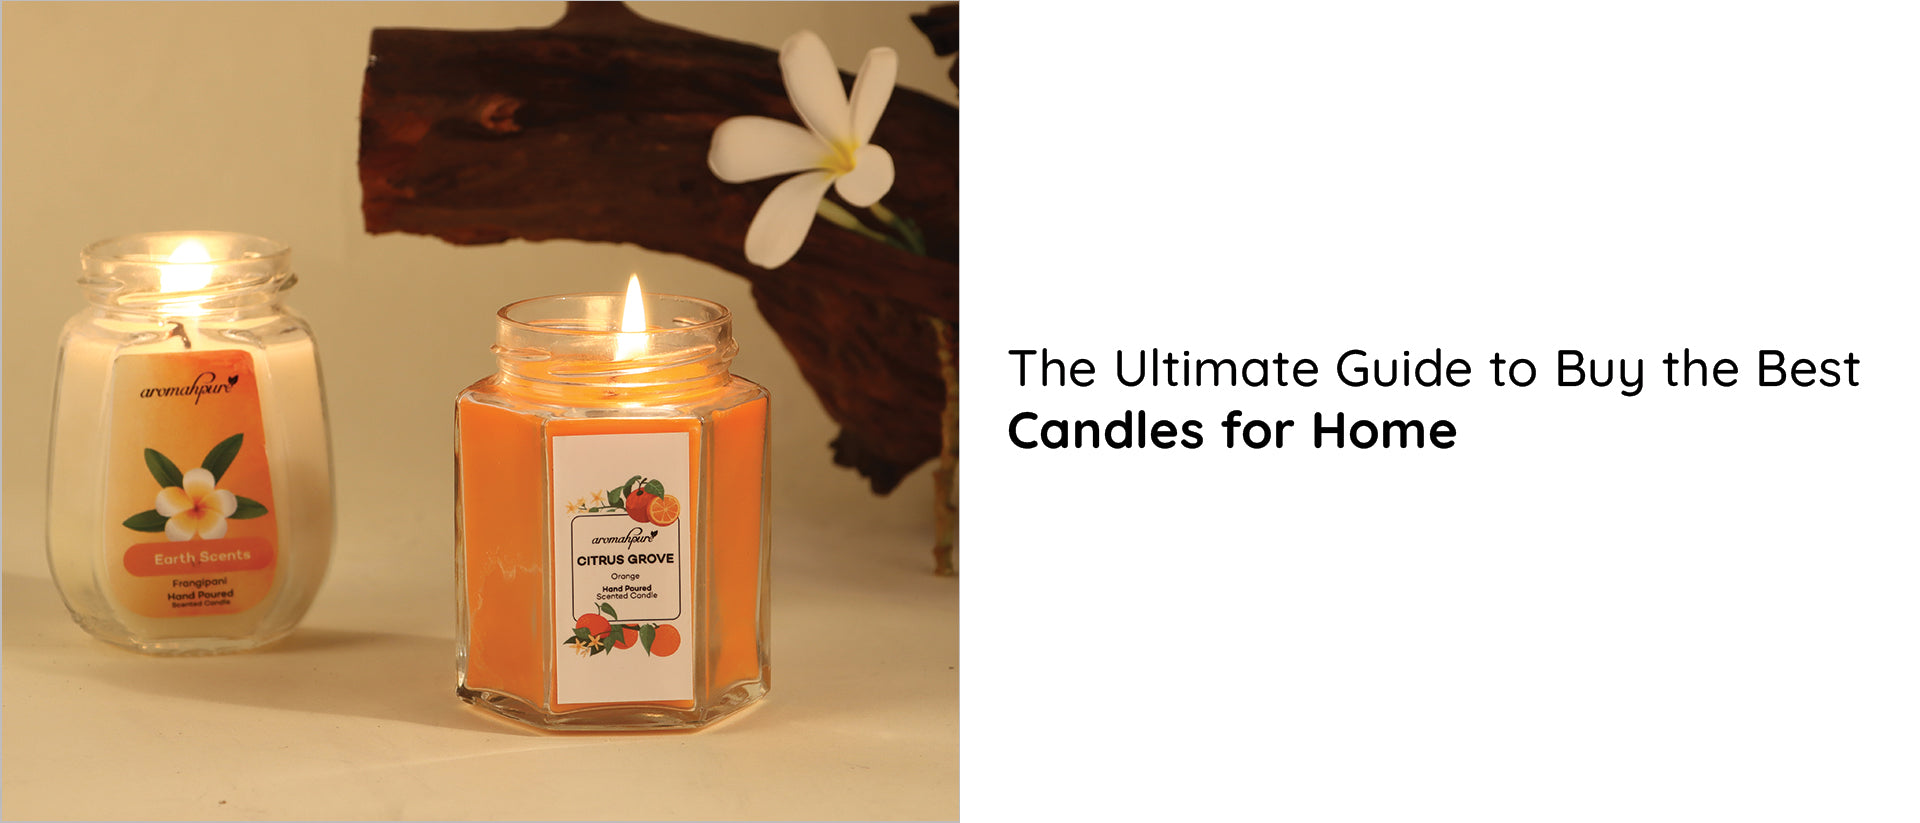 The Ultimate Guide to Buy the Best Candles for Home